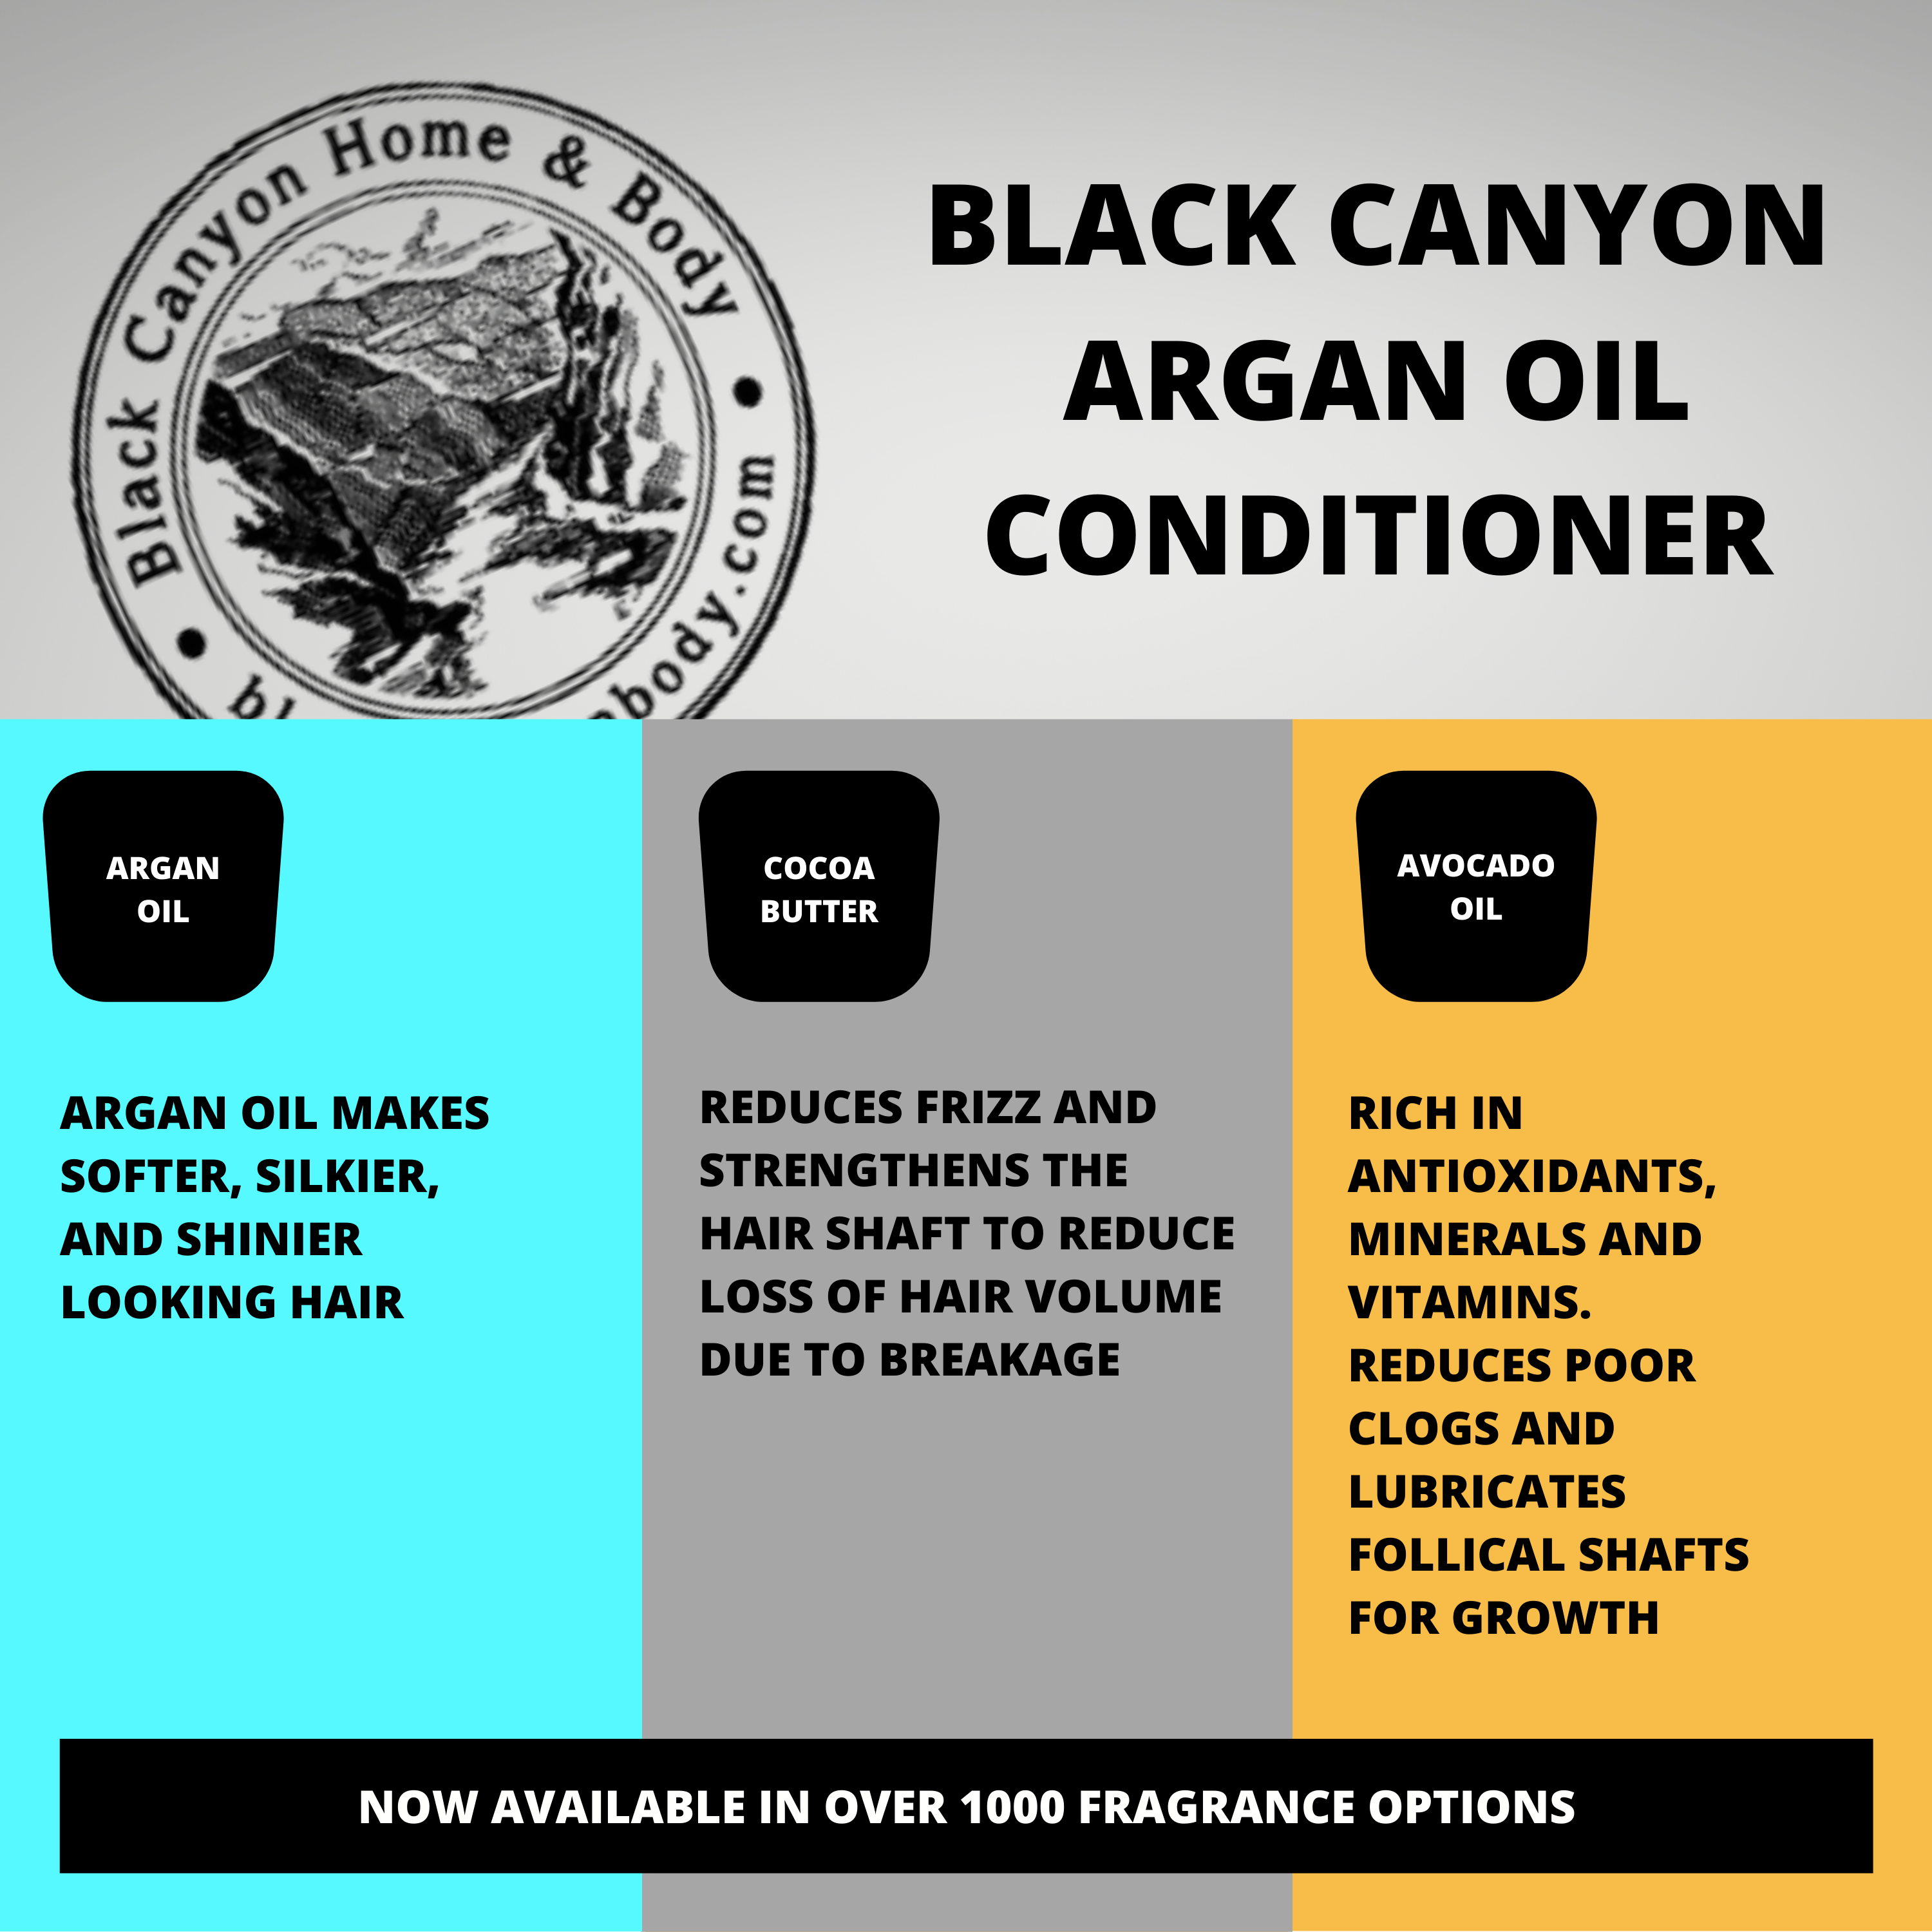 Black Canyon Black Currant Tea Scented Conditioner with Argan Oil